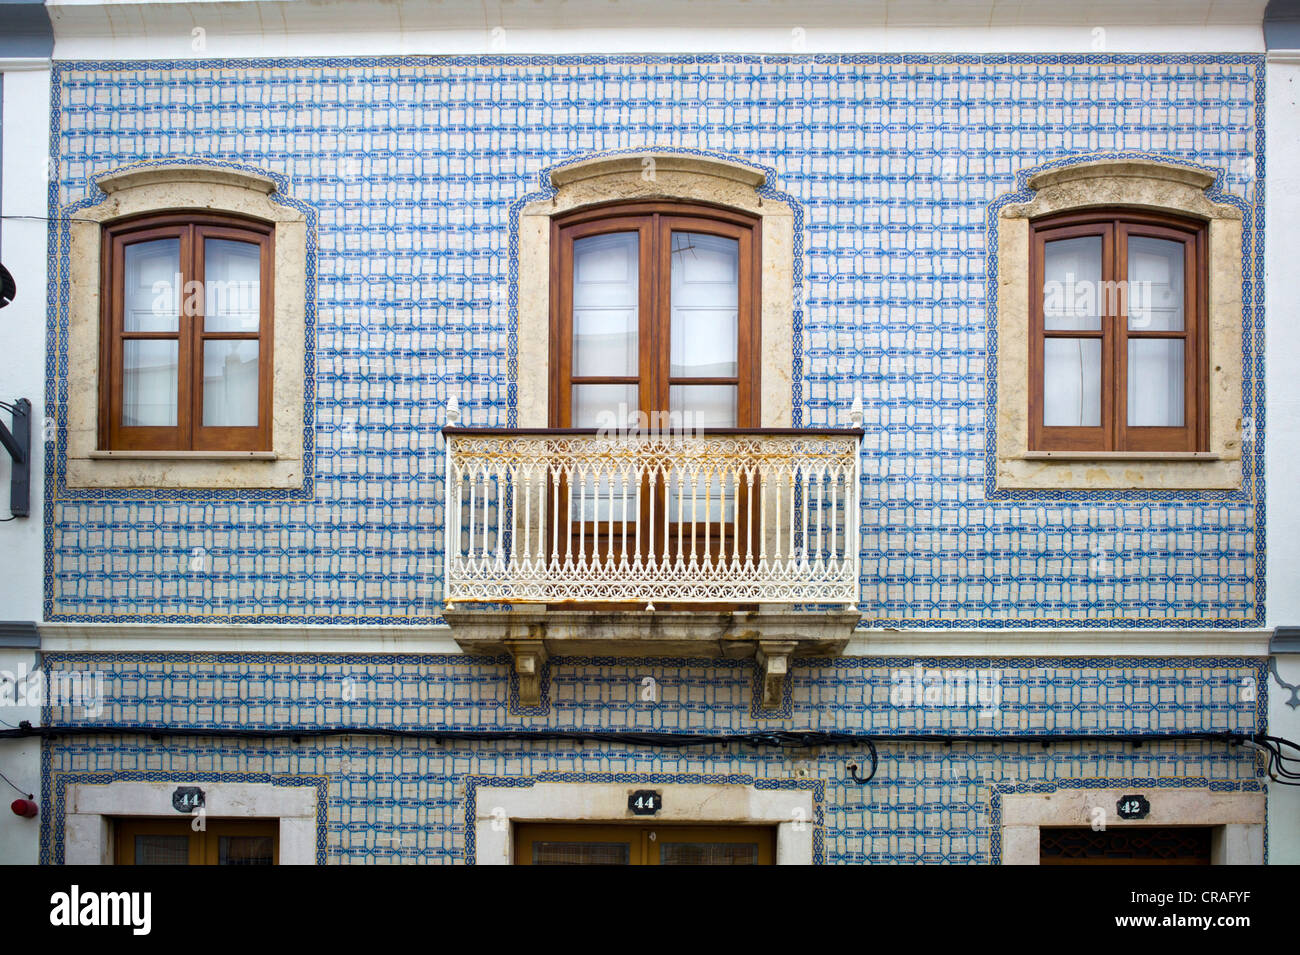 Typical, painted Azulejo ceramic tiles on a house facade, Lagos, Algarve, Portugal, Europe Stock Photo